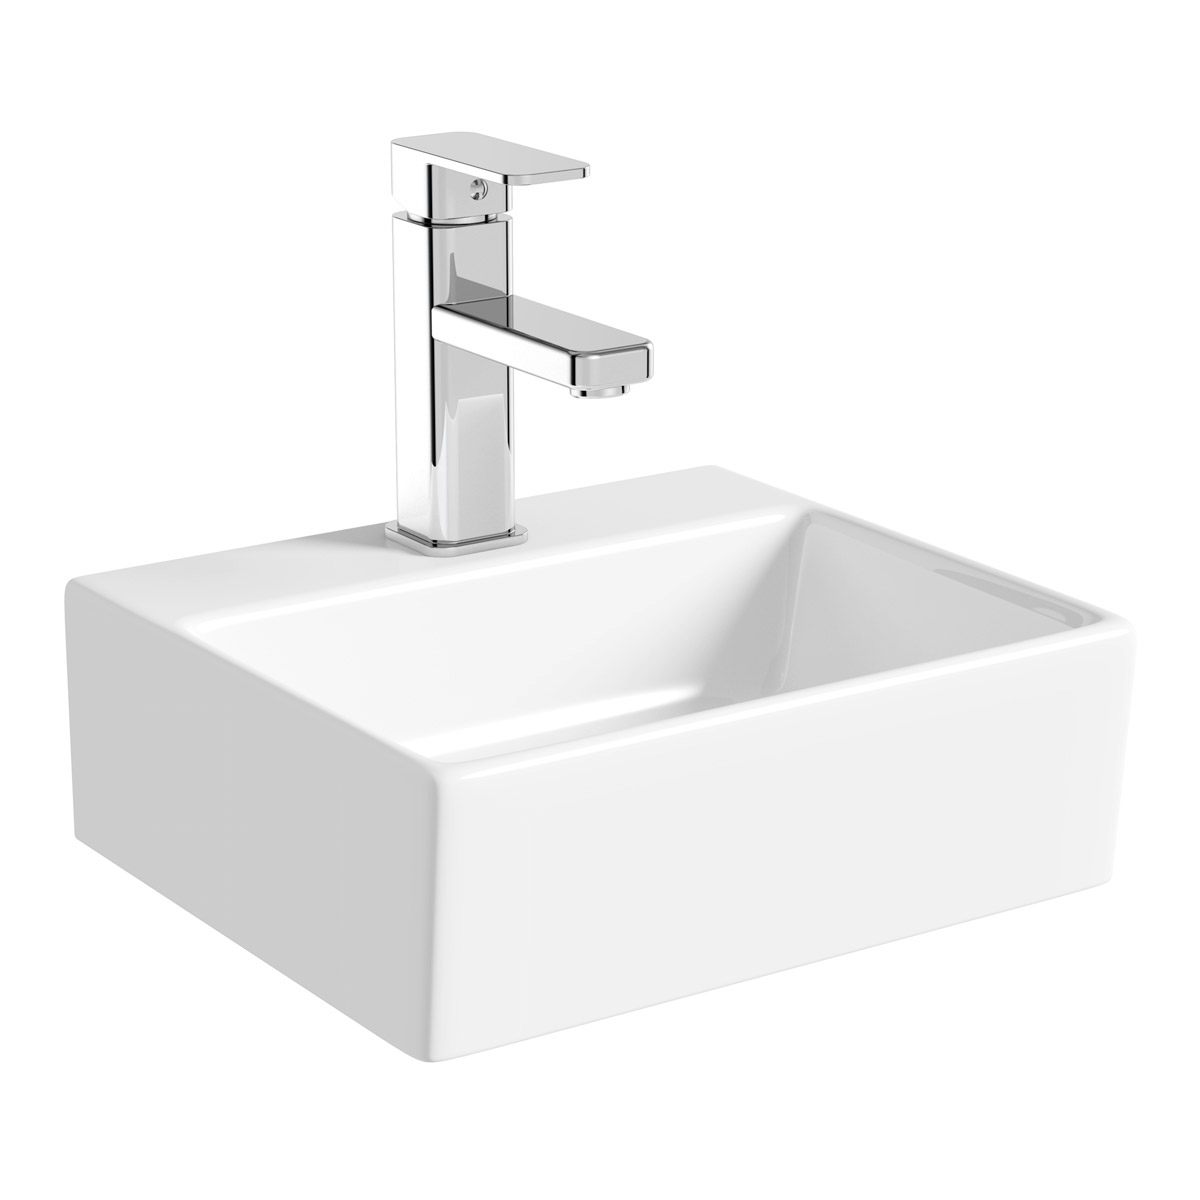 Orchard Derwent square 1 tap hole countertop basin 330mm